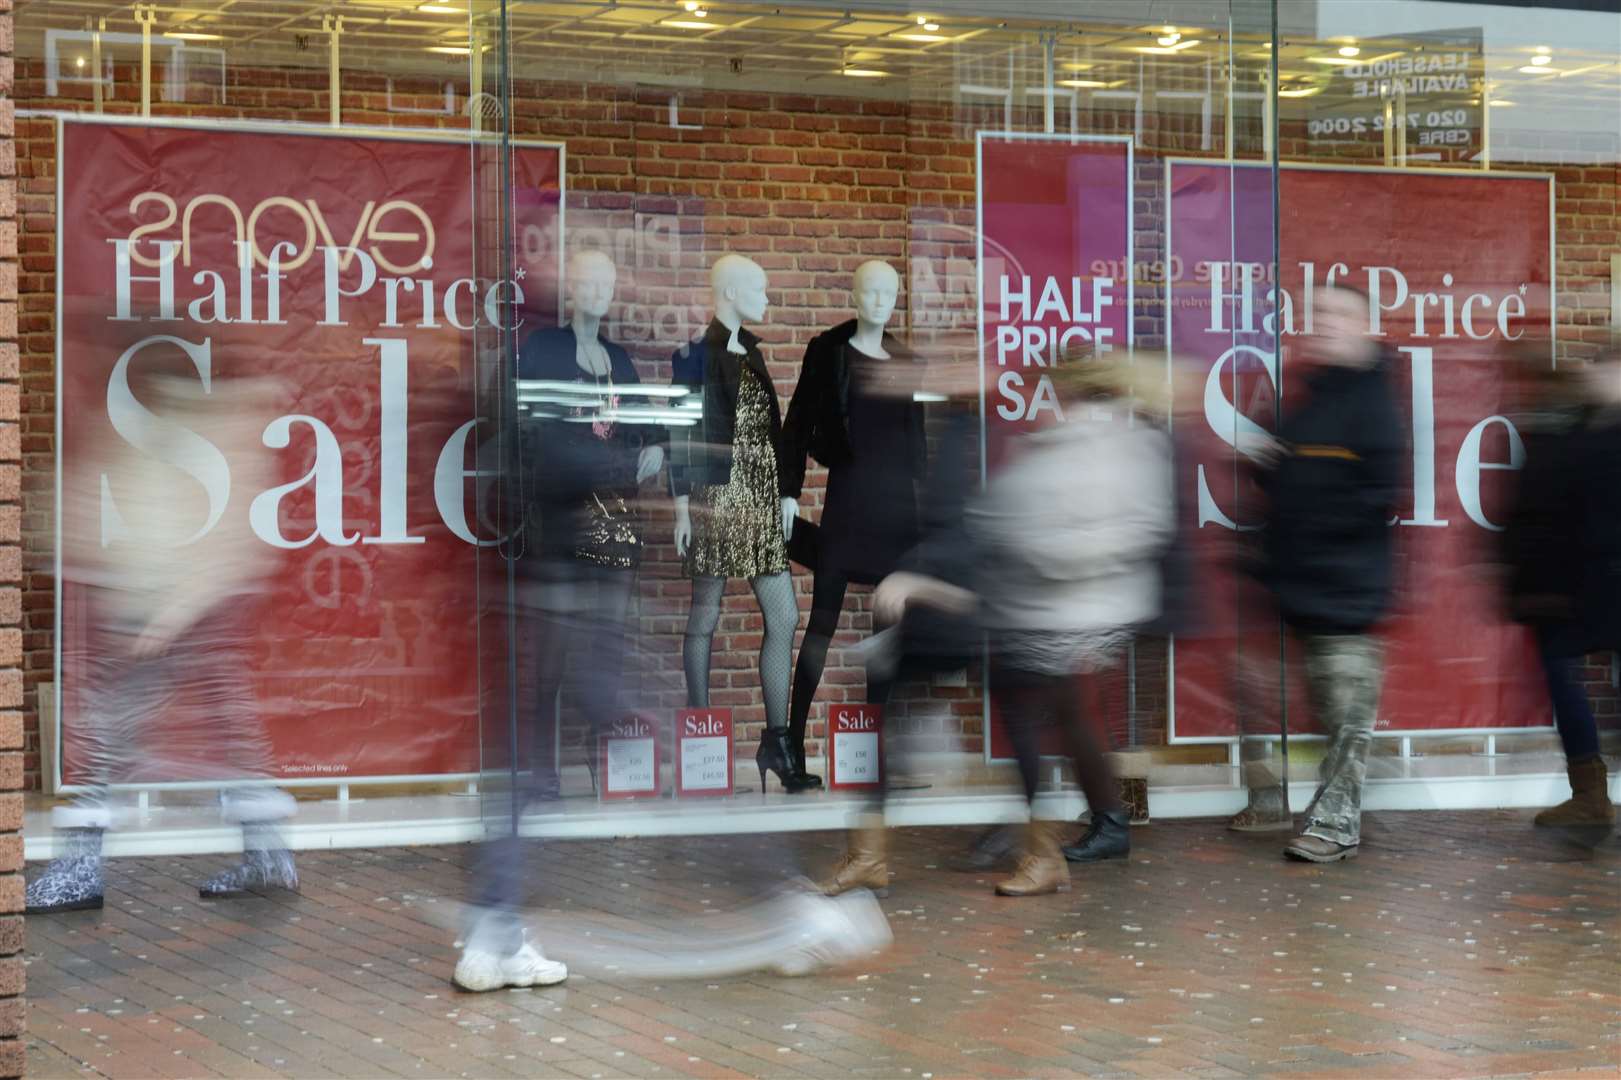 Debenhams is just the latest major high street name to be struggling